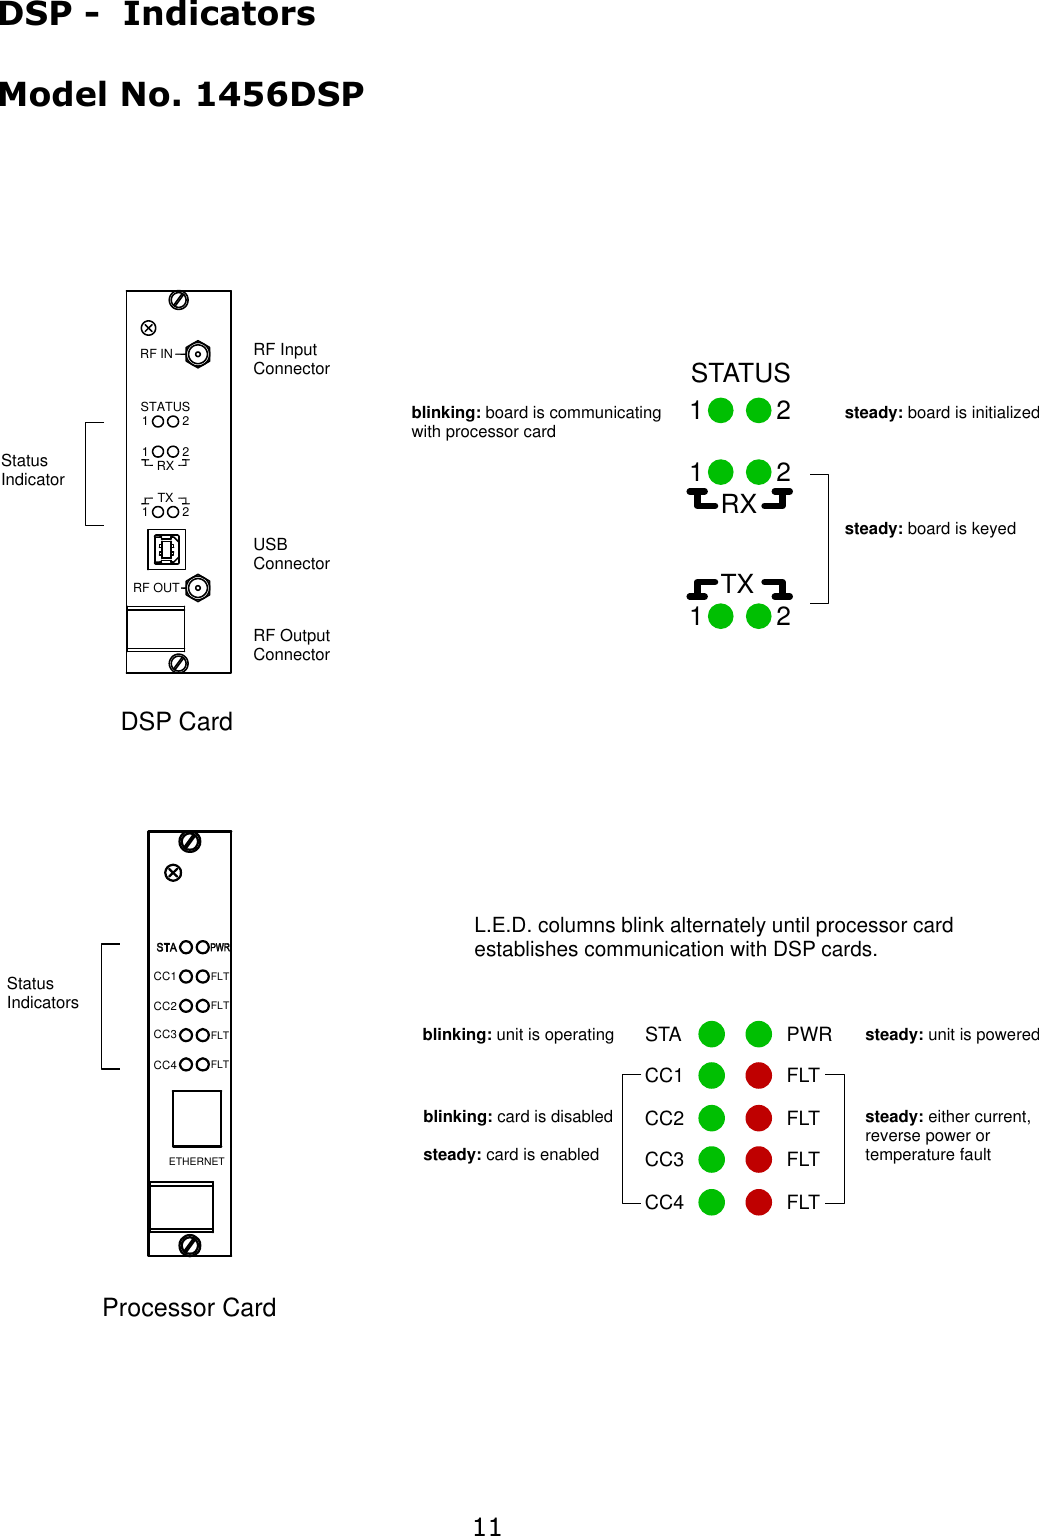 11DSP CardProcessor CardStatusIndicatorRF OutputConnectorUSBConnectorRF InputConnectorStatusIndicatorsSTATUS1 21 21 2RXTXSTACC1PWRFLTFLTFLTFLTblinking: unit is operating steady: unit is poweredsteady: either current, reverse power or temperature faultblinking: card is disabledsteady: card is enabledL.E.D. columns blink alternately until processor card establishes communication with DSP cards.steady: board is initializedsteady: board is keyedblinking: board is communicating with processor cardRF OUTRF INTXSTATUSRX111222DSP -  IndicatorsModel No. 1456DSPETHERNETCC1FLTFLT FLT FLTCC2CC3CC4CC2CC3CC4